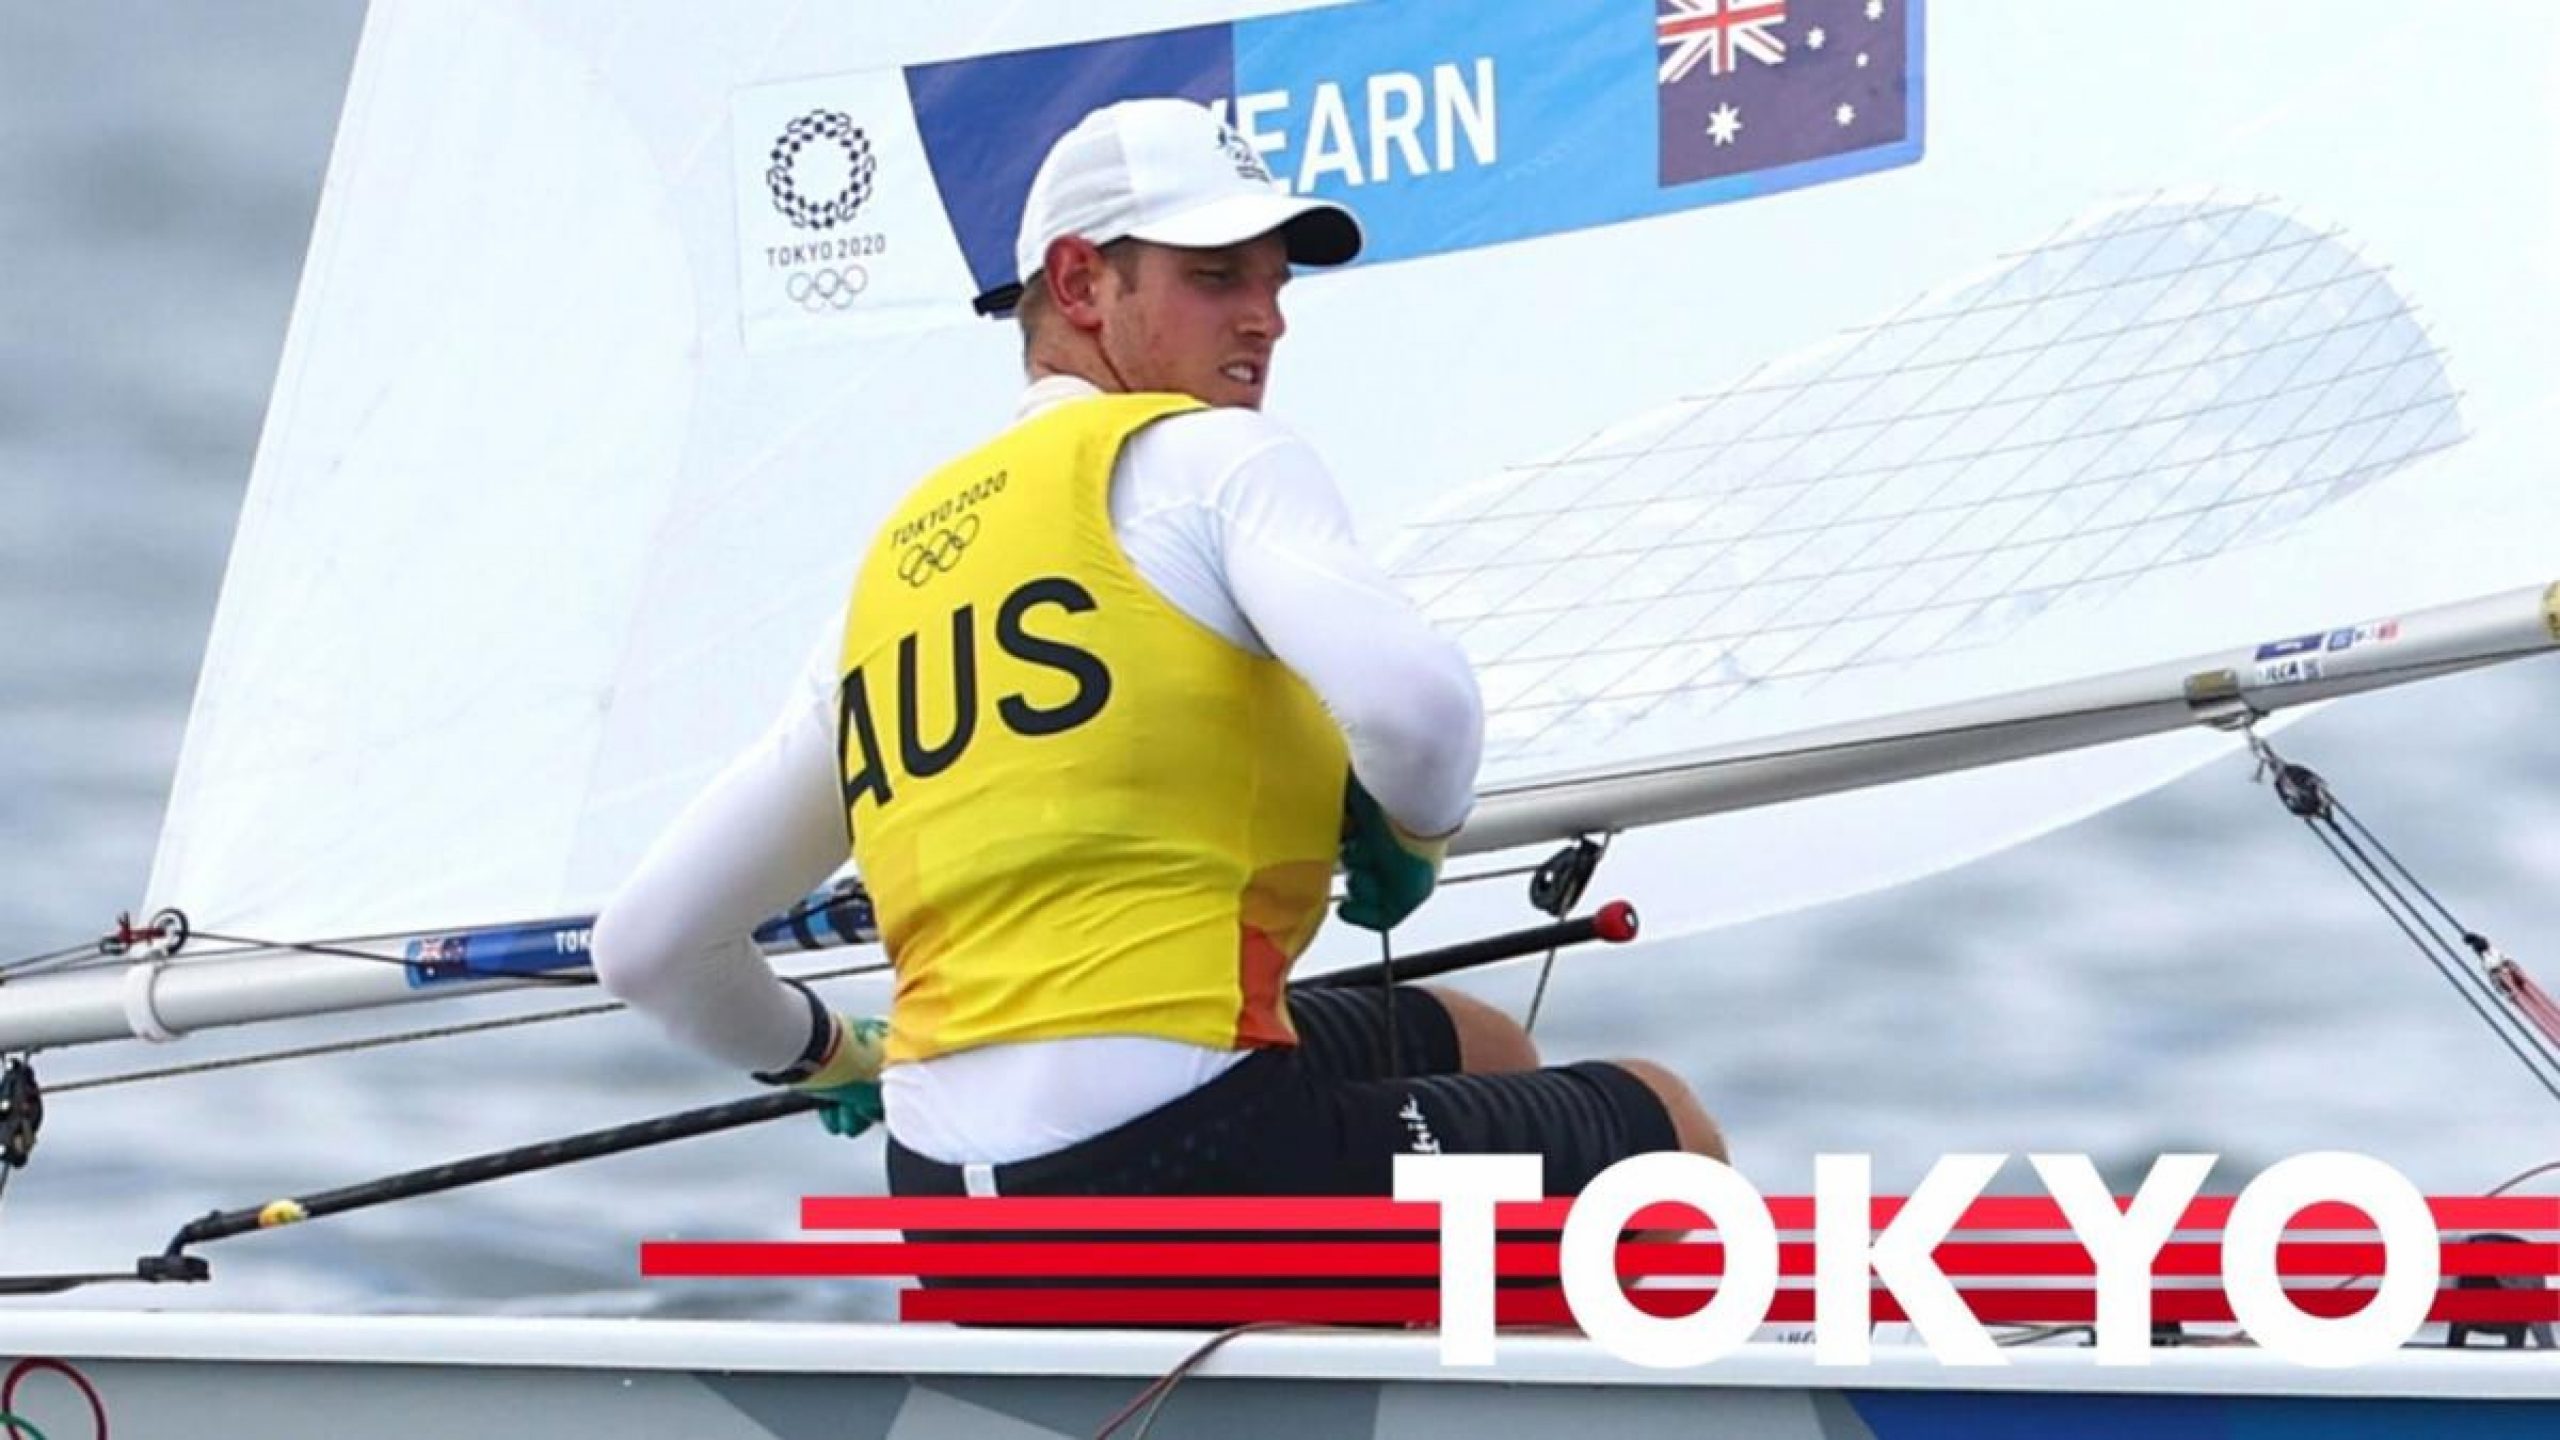 Australia’s Matt Wearn officially secures sailing Laser class gold medal at Tokyo Olympics 2020